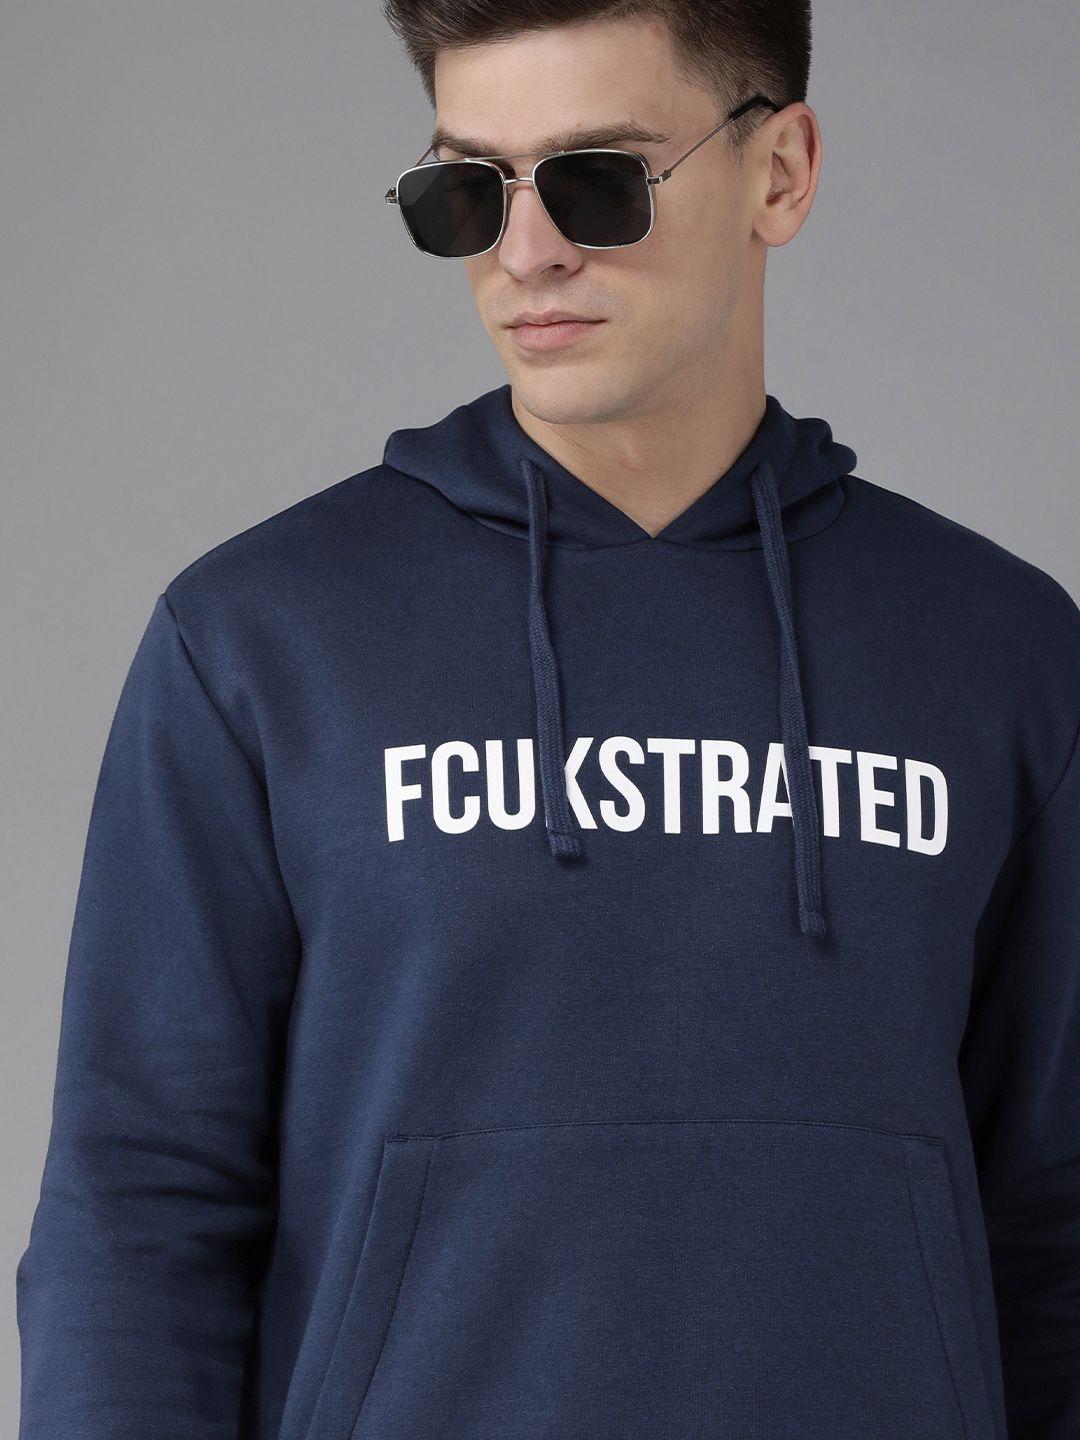 french connection men navy blue brand logo printed hooded sweatshirt